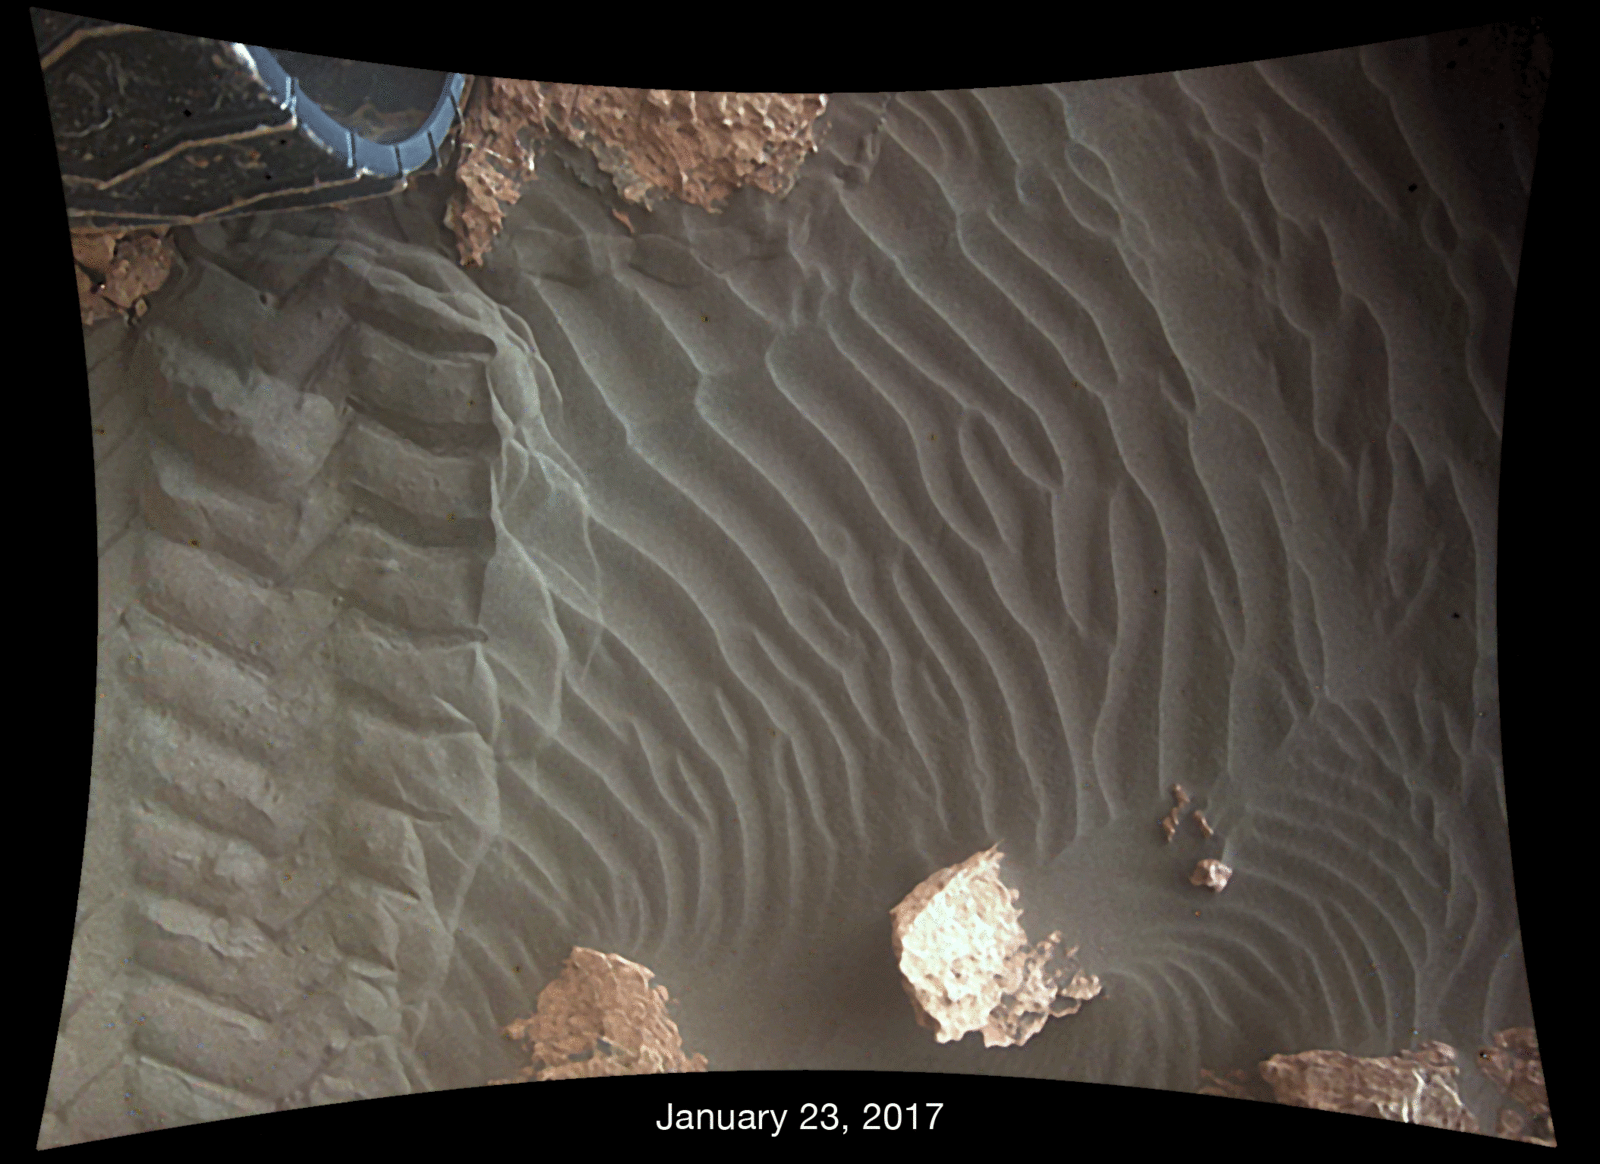 Sand Moving Under Curiosity, One Day to Next